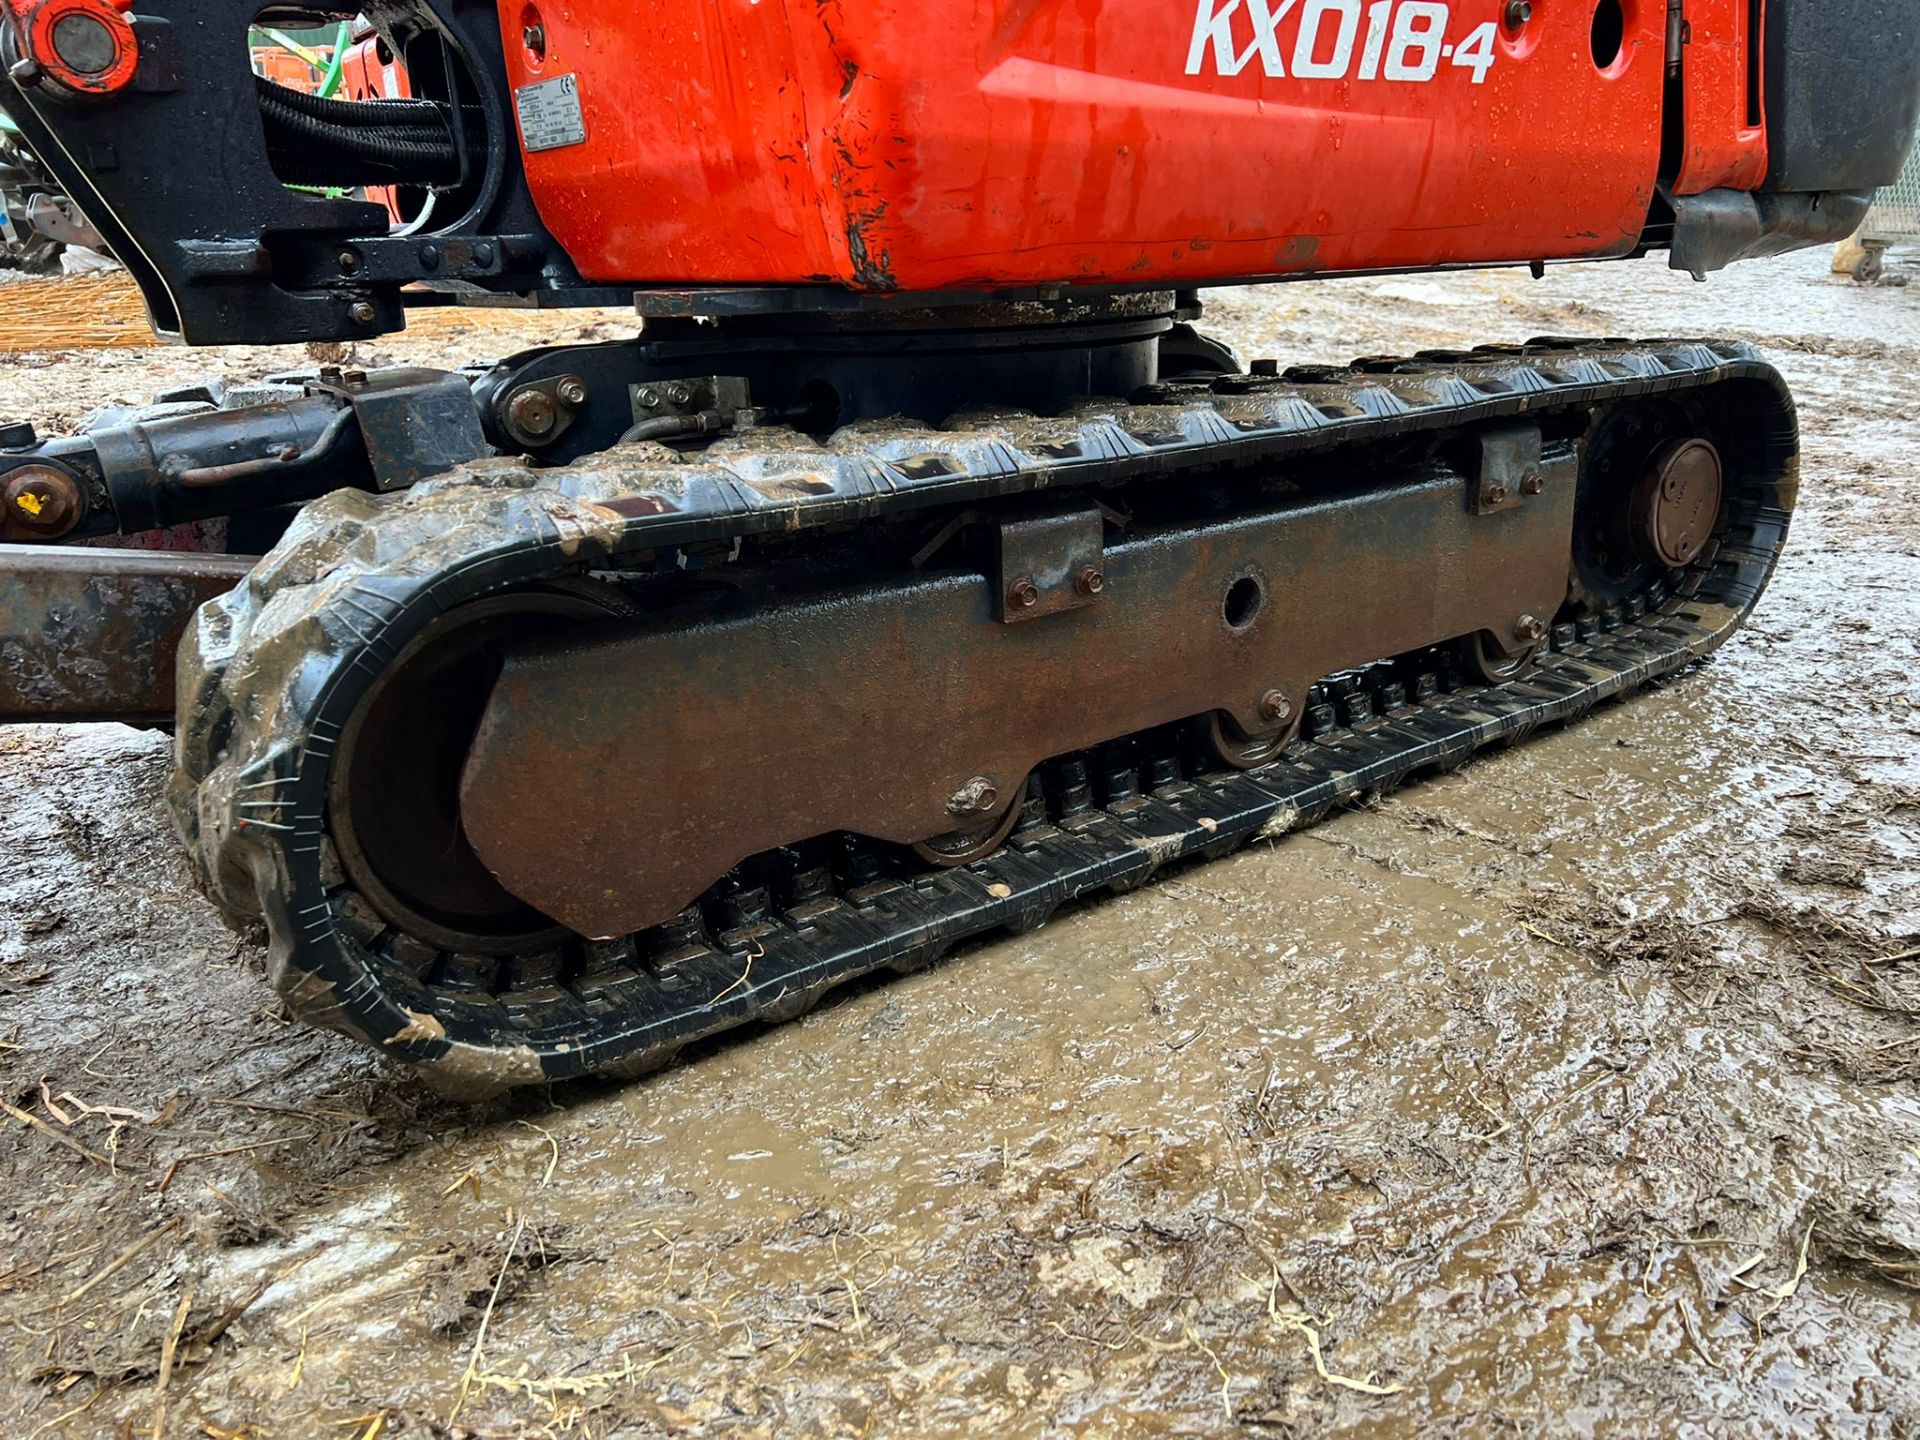 2018 KUBOTA KX018-4 1.8 TON MINI DIGGER, RUNS DRIVES AND DIGS, SHOWING A LOW 1681 HOURS - Image 20 of 20